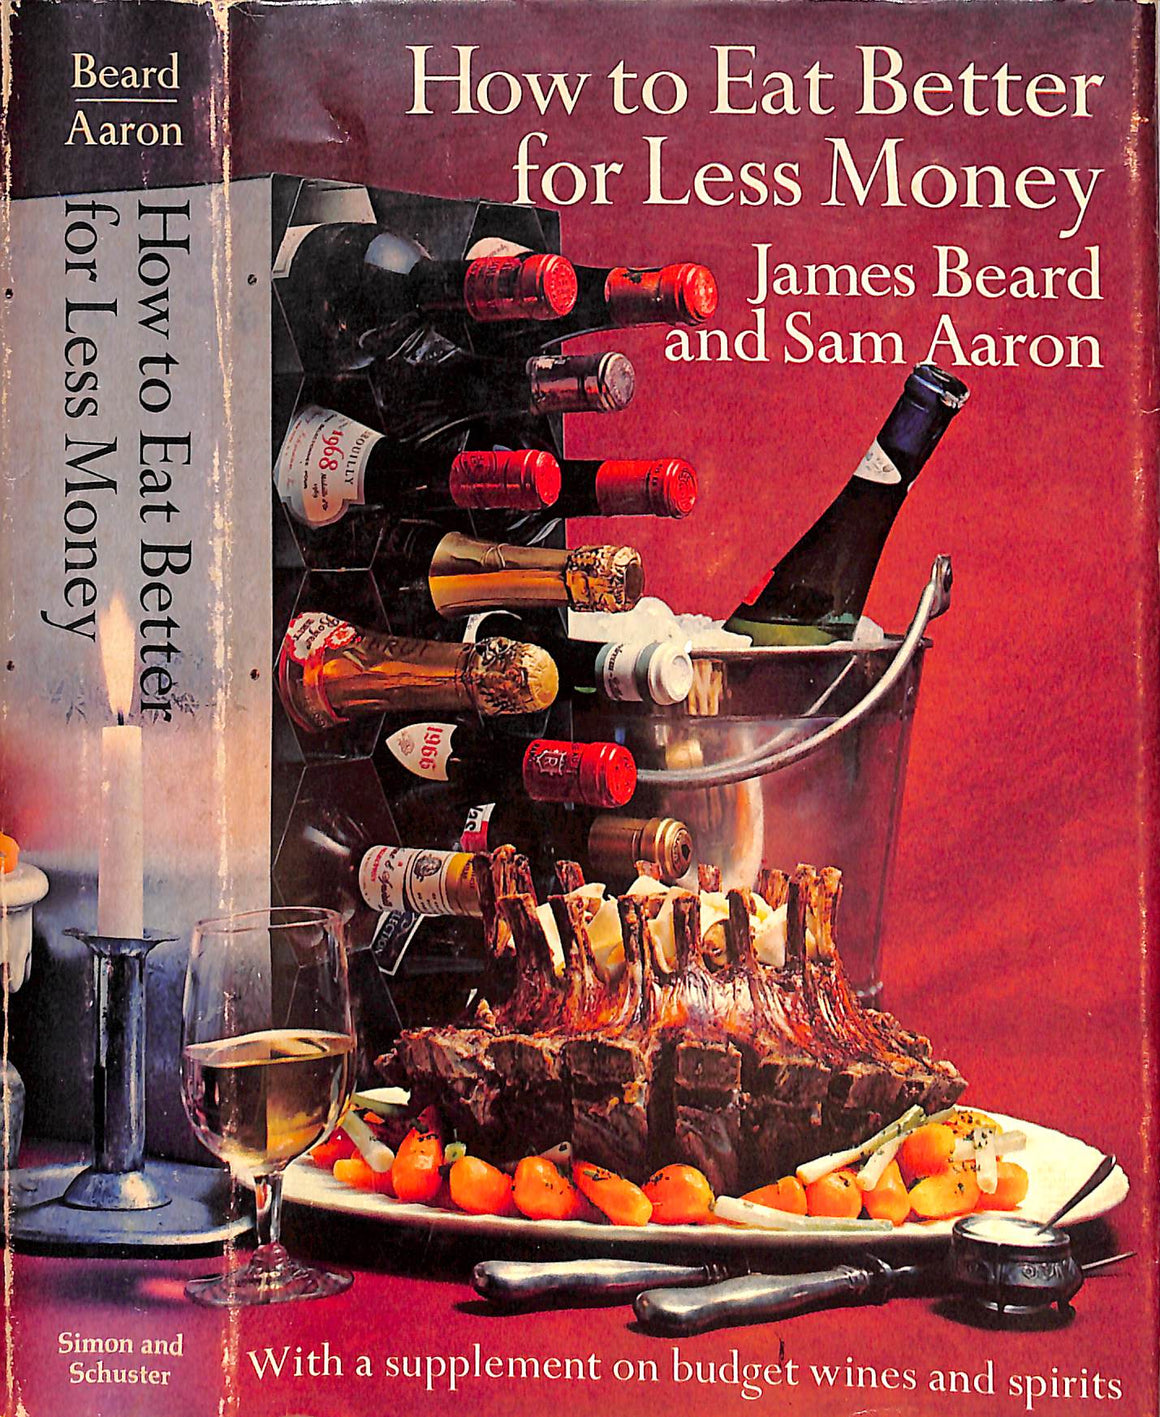 "How To Eat Better For Less Money" 1970 BEARD, James and AARON, Sam